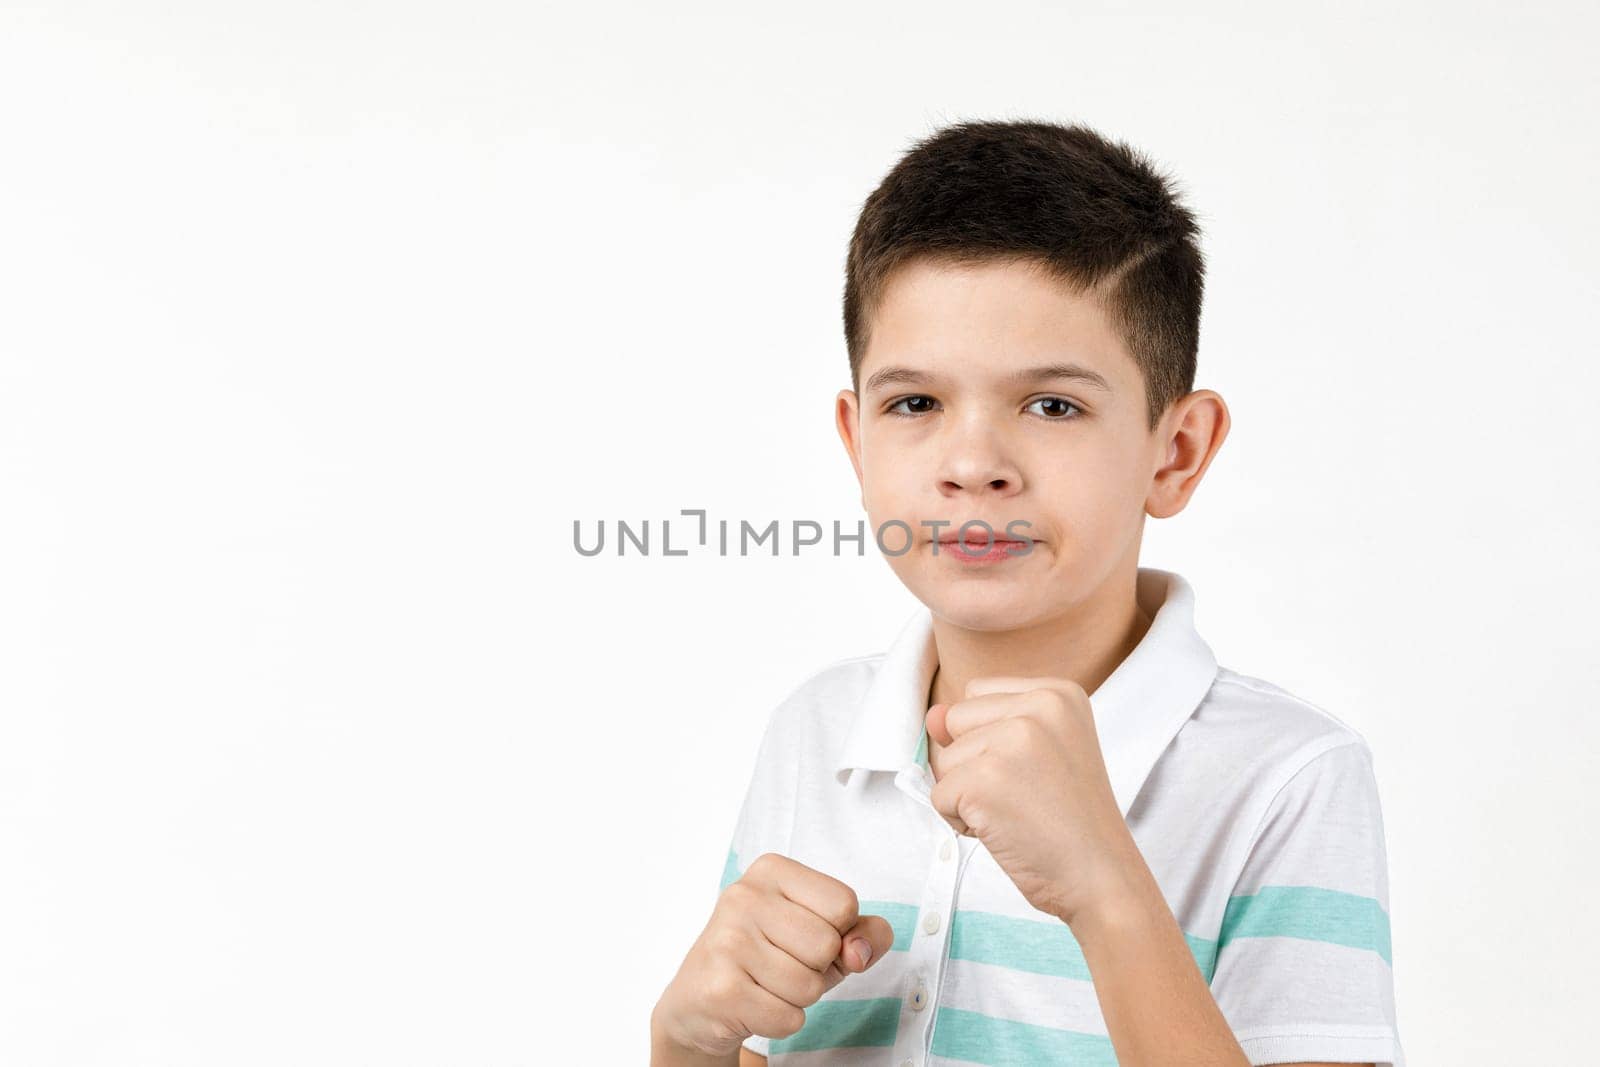 angry little child boy mad raising fist over white background. Human emotions and facial expression